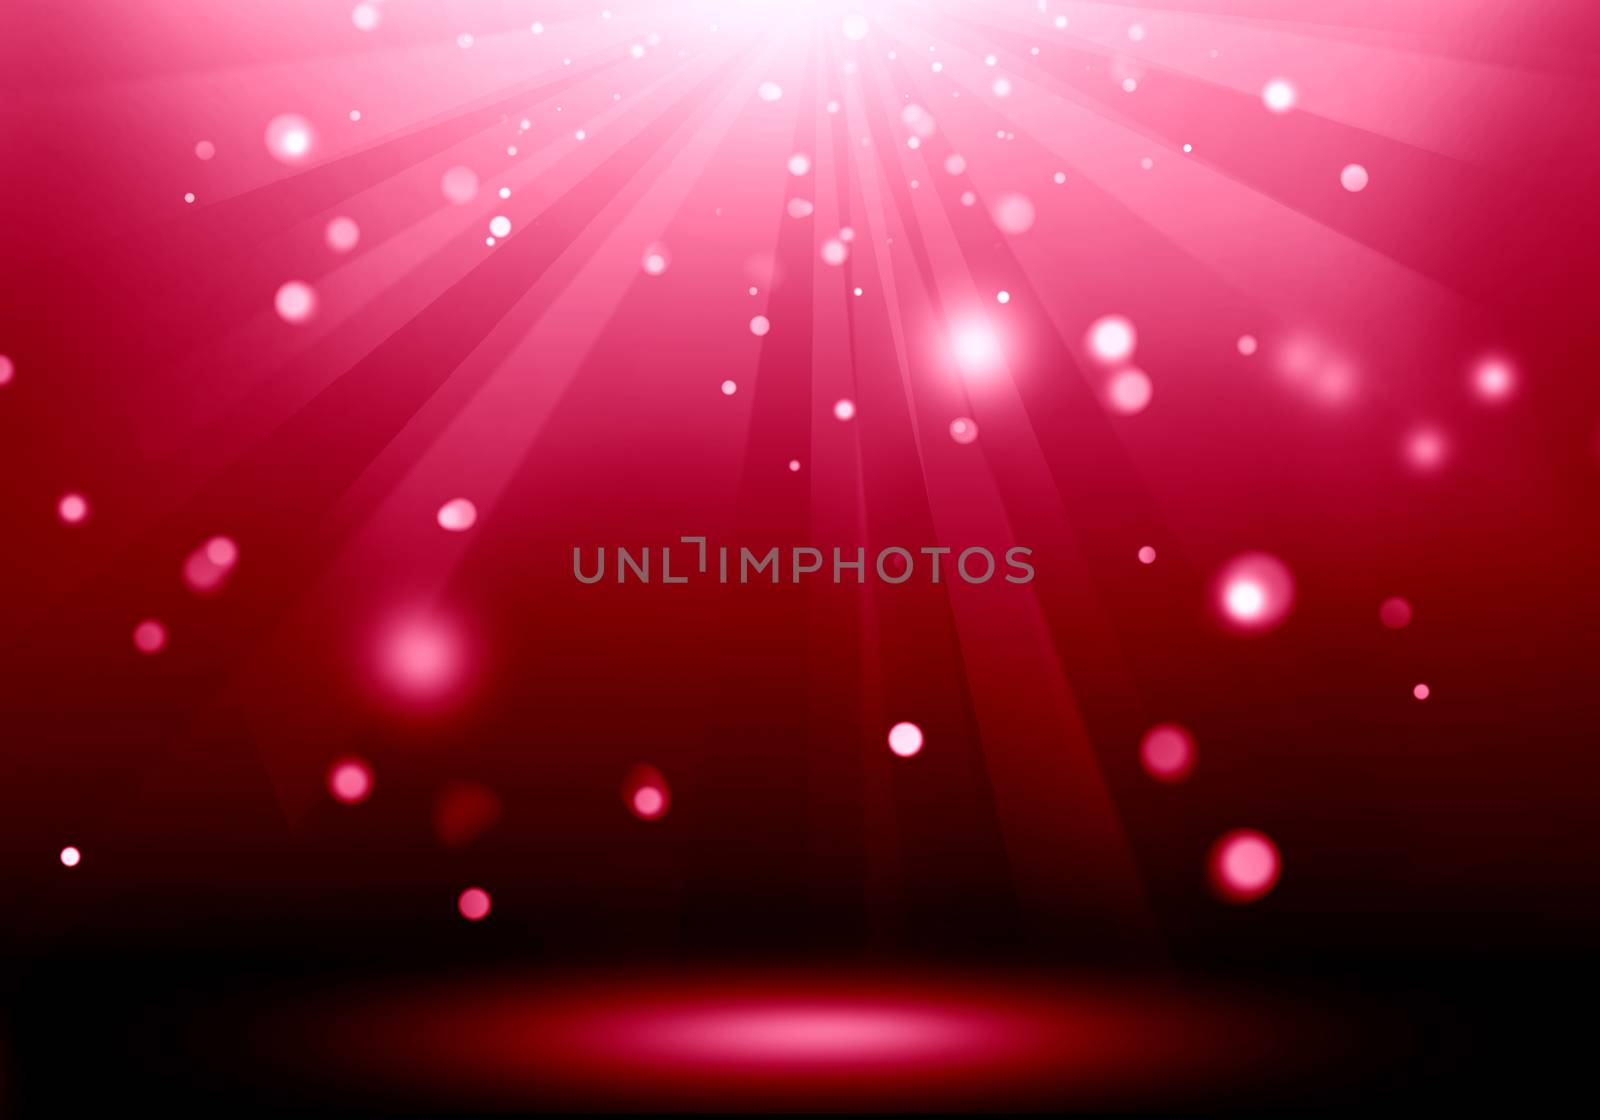 Abstract image of red lighting flare on the floor stage : Fill o by jayzynism